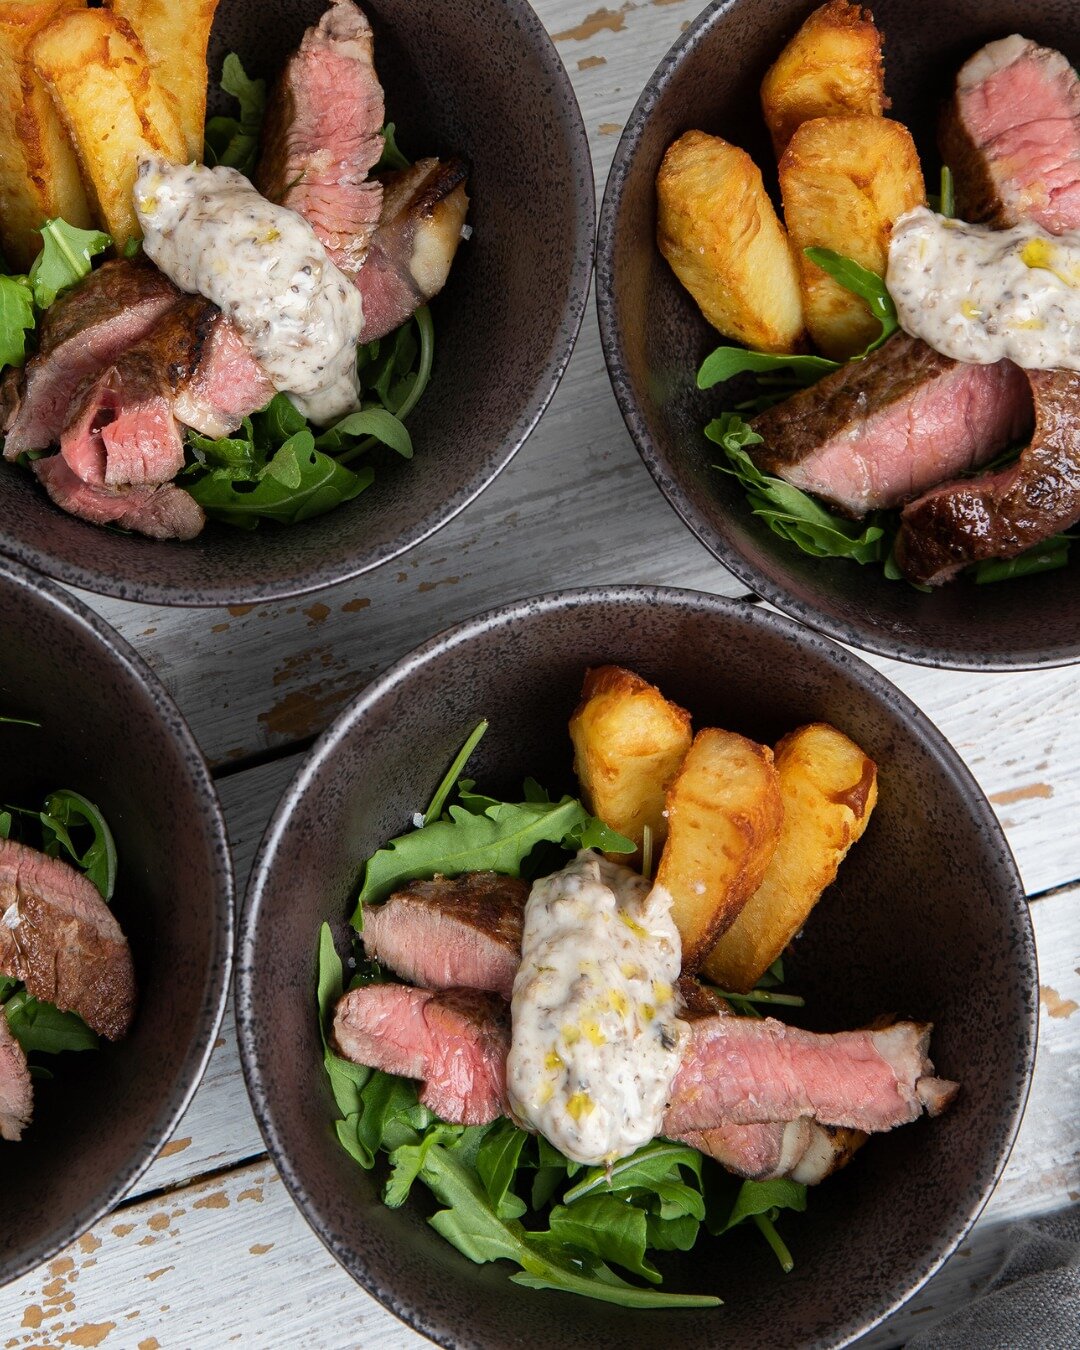 Elevate your next corporate event with our impressive professional catering for intimate gourmet lunches, team workshops, all-day conferences, work parties, and more.

Our posh steak &amp; chips with horesradish it a popular bowl food option all year